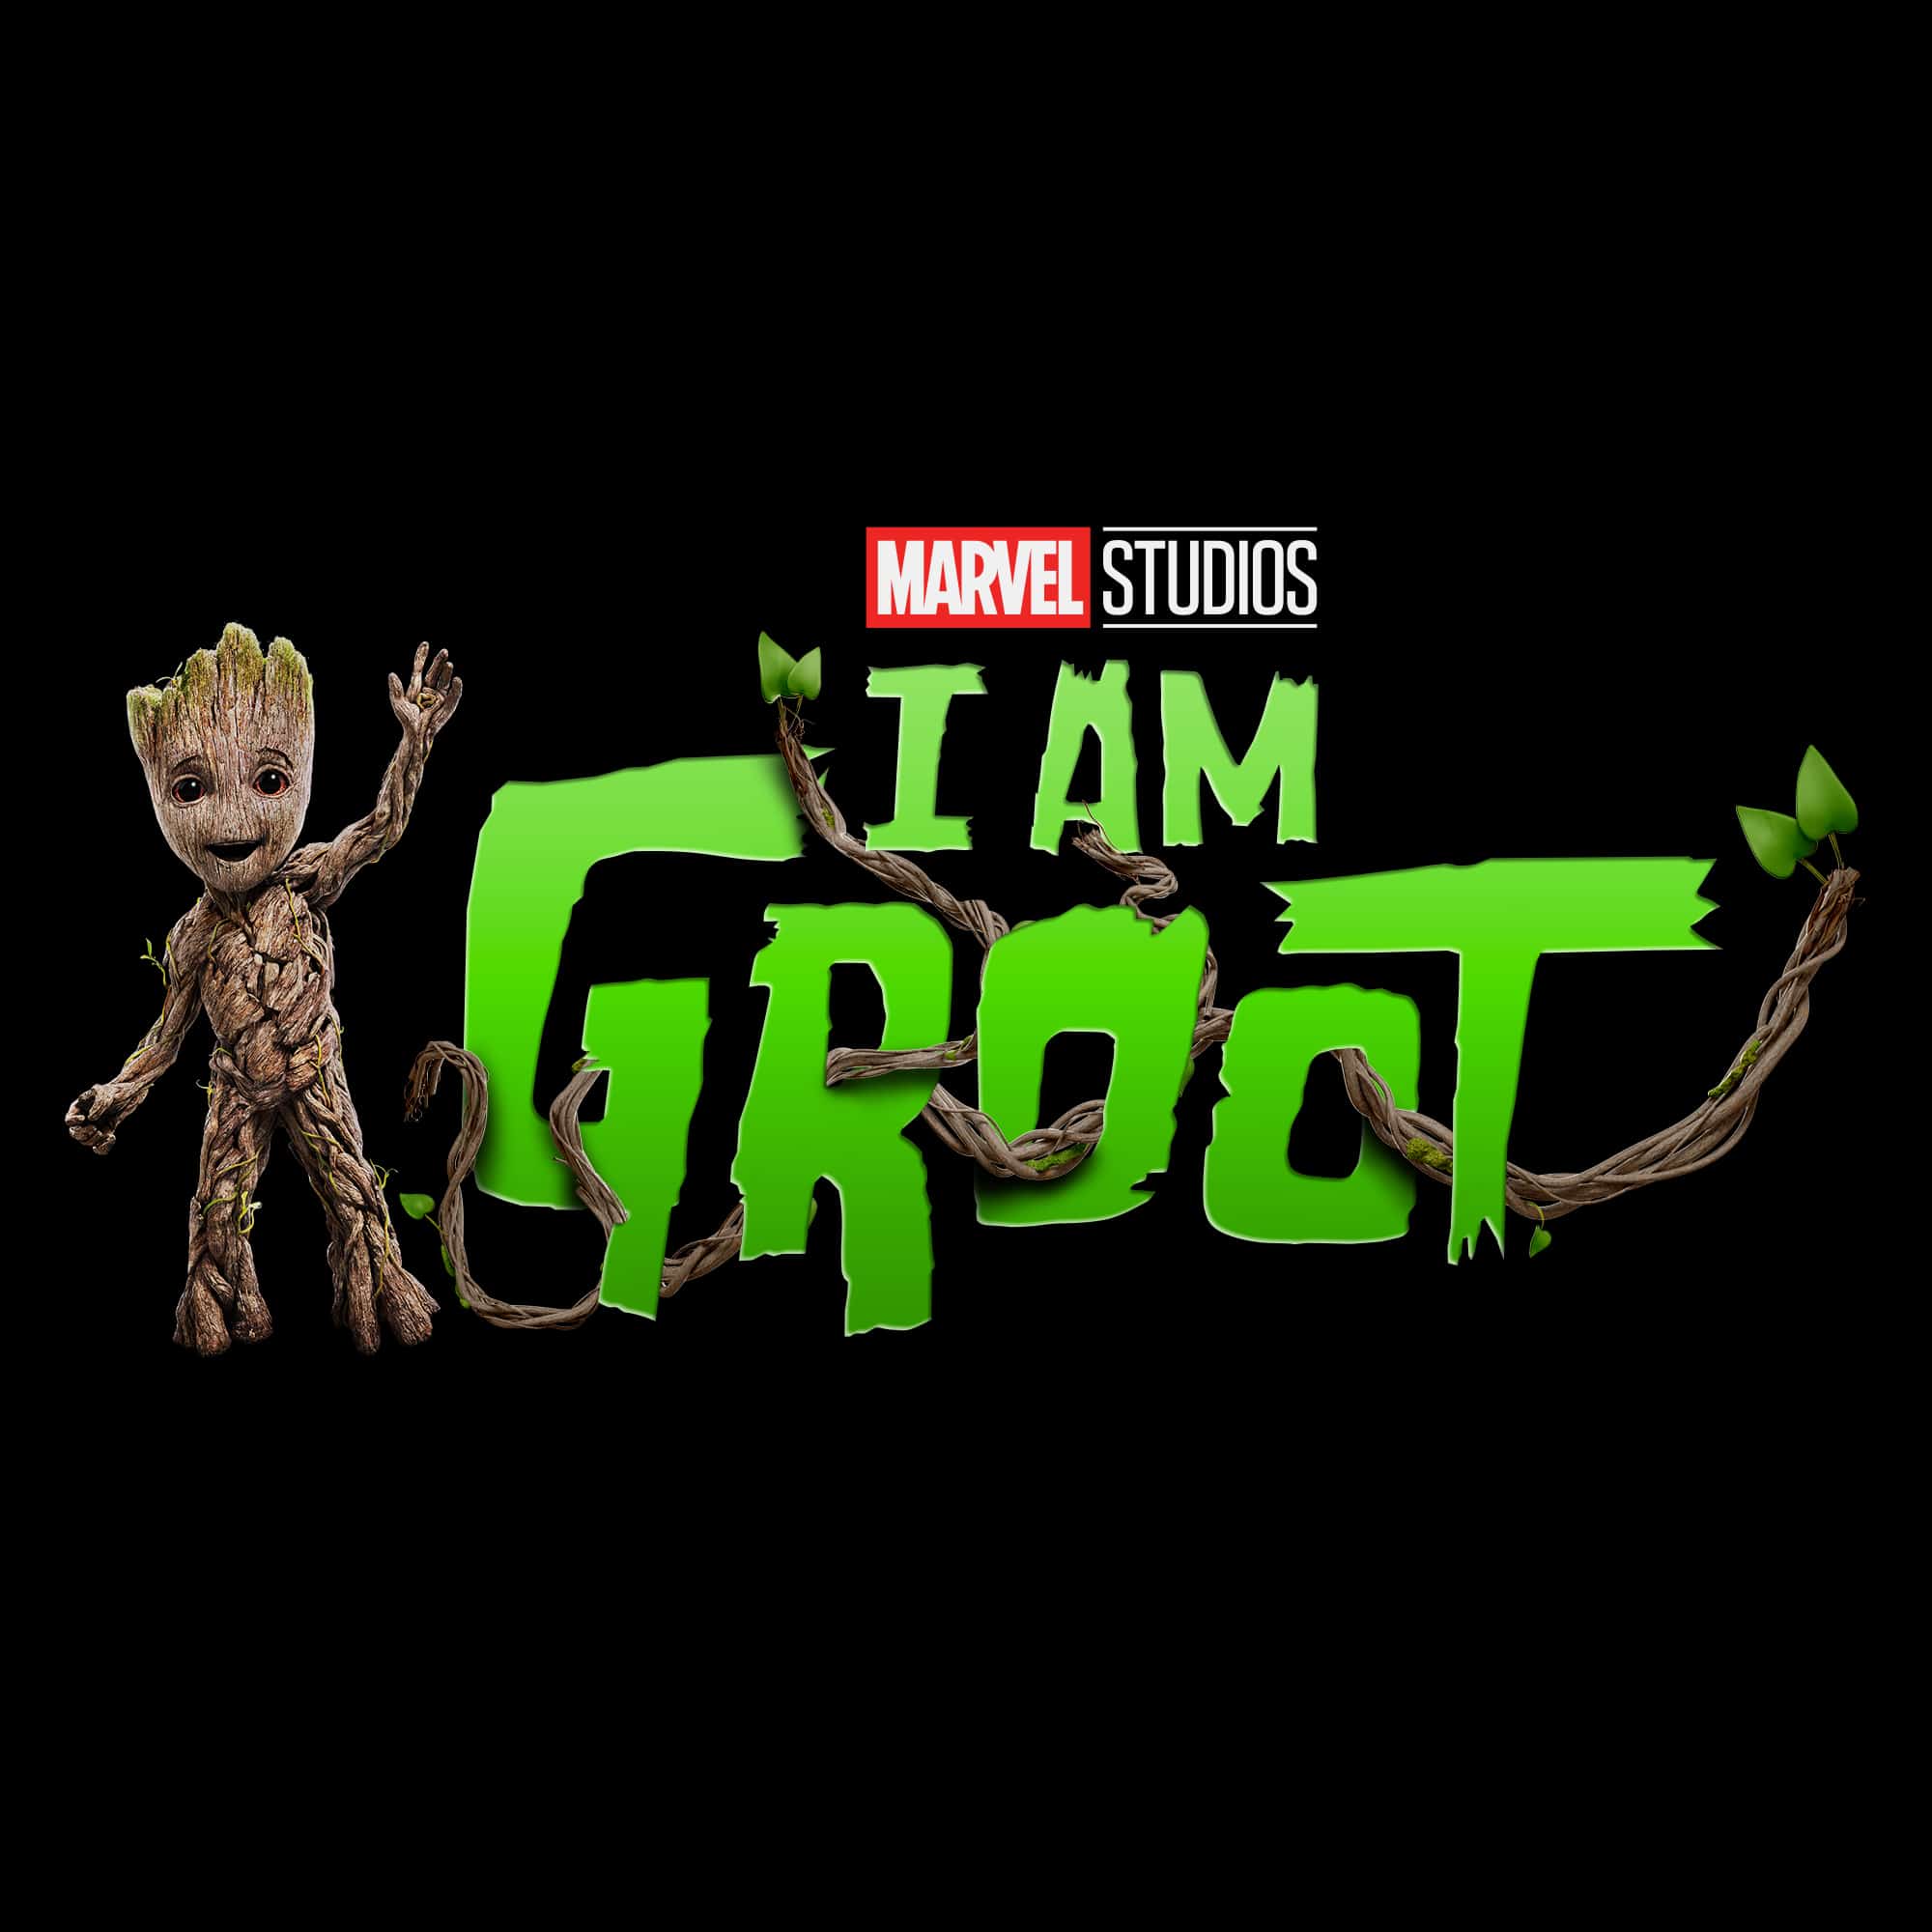 I Am Groot – Check Out The Adorable 1st Poster and Release Date For Marvel’s New Show